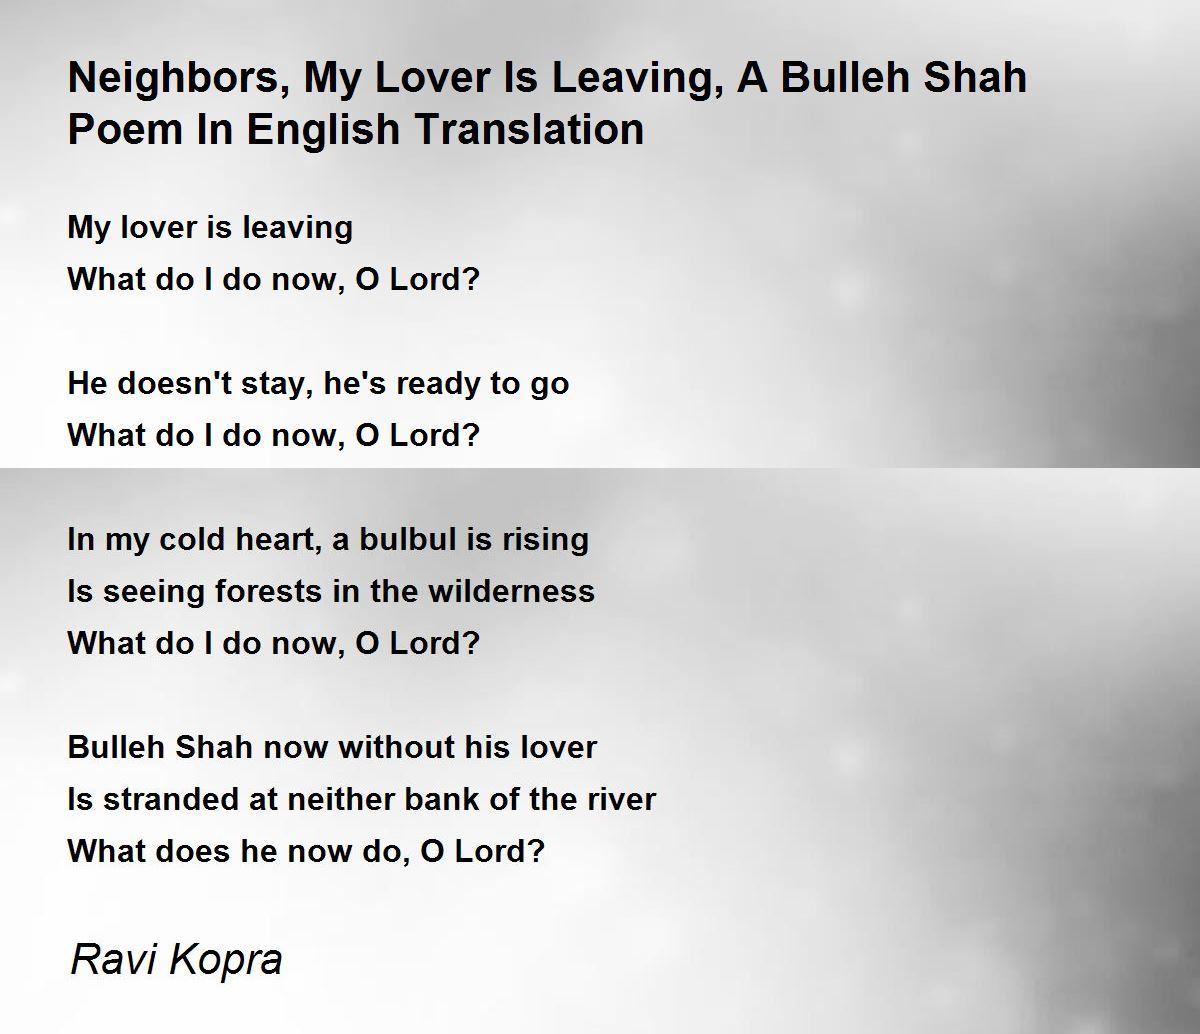 Neighbors, My Lover Is Leaving, A Bulleh Shah Poem In English ...